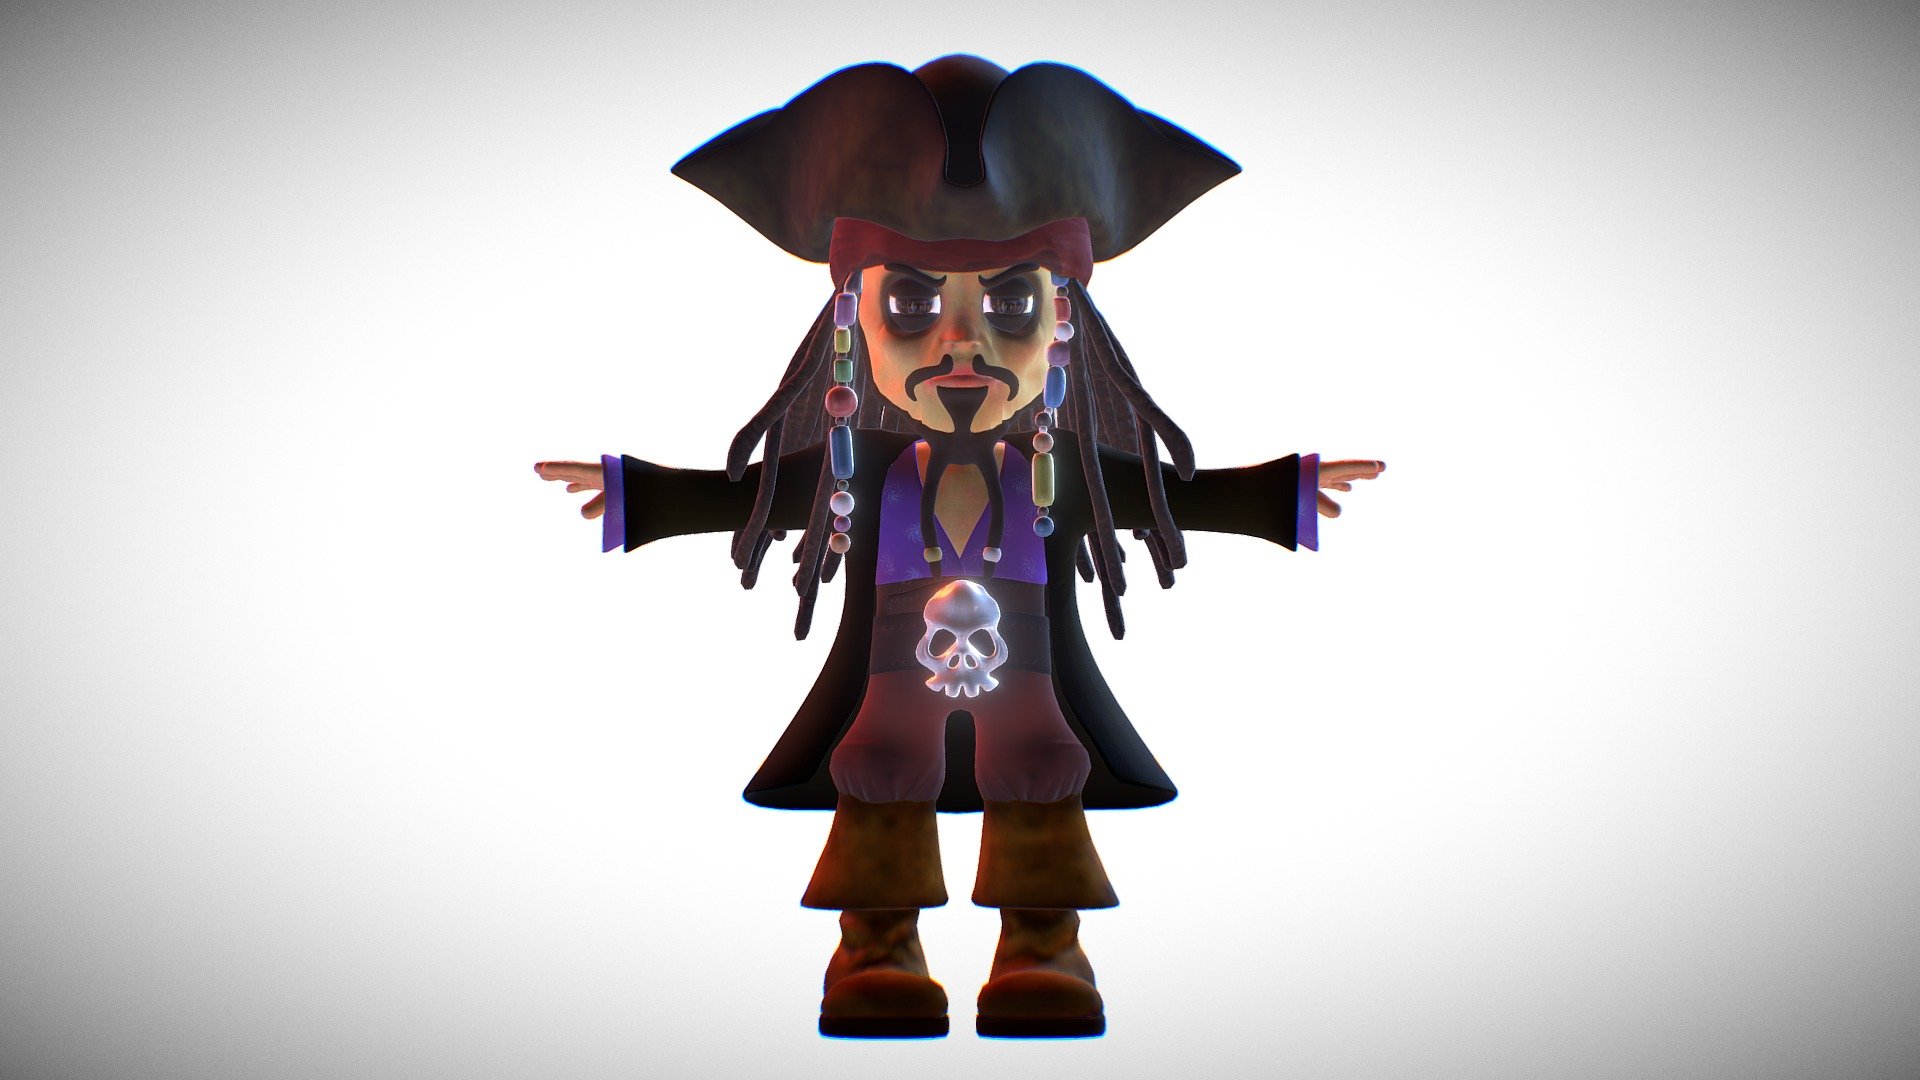 This is a model made by me while i was studying some stuffs. 
The original creator of this cartoon was Prof. Diego Poncell - Cap. Jack Sparrow Cartoon Versio - 3D model by MarcosFaria 3d model